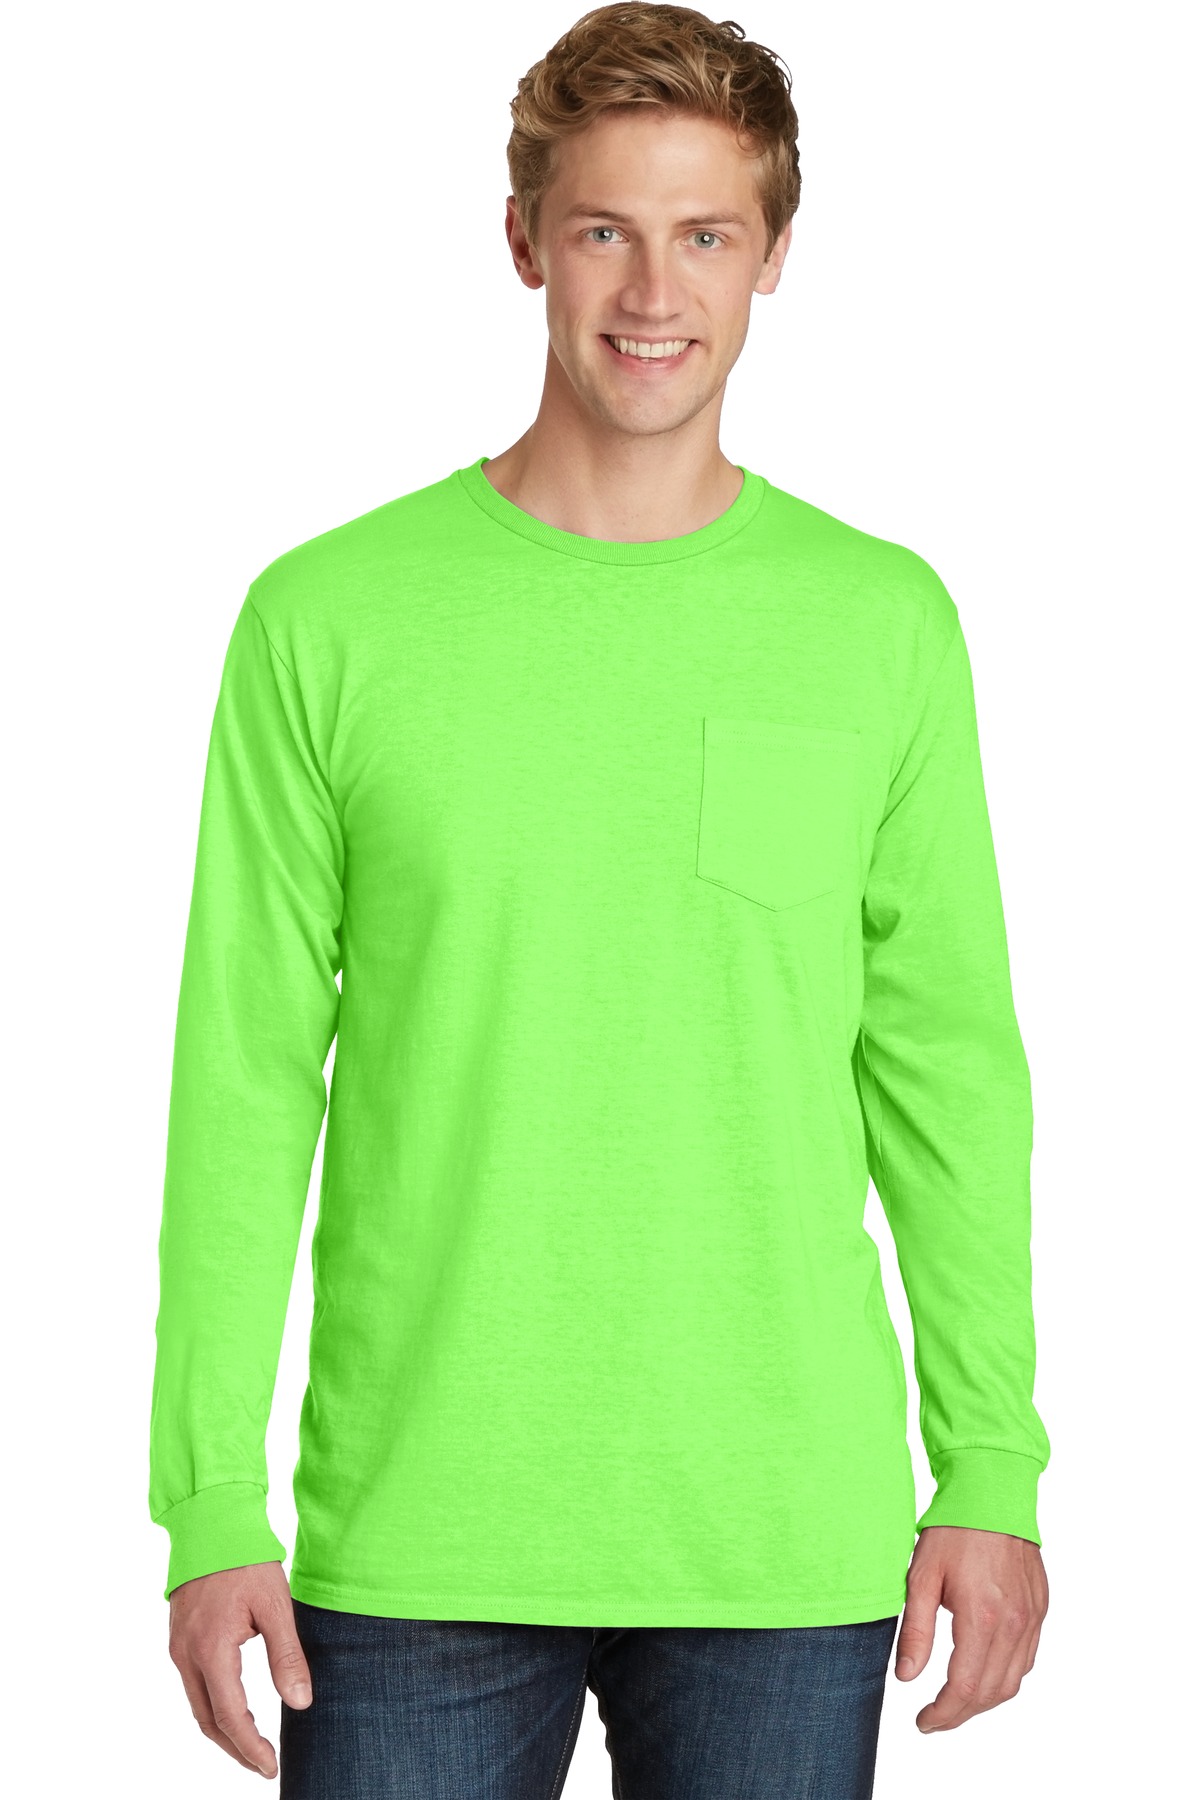 Port & Company Pigment Dyed Long Sleeve Pocket Tee-M (Neon Green) - image 1 of 6